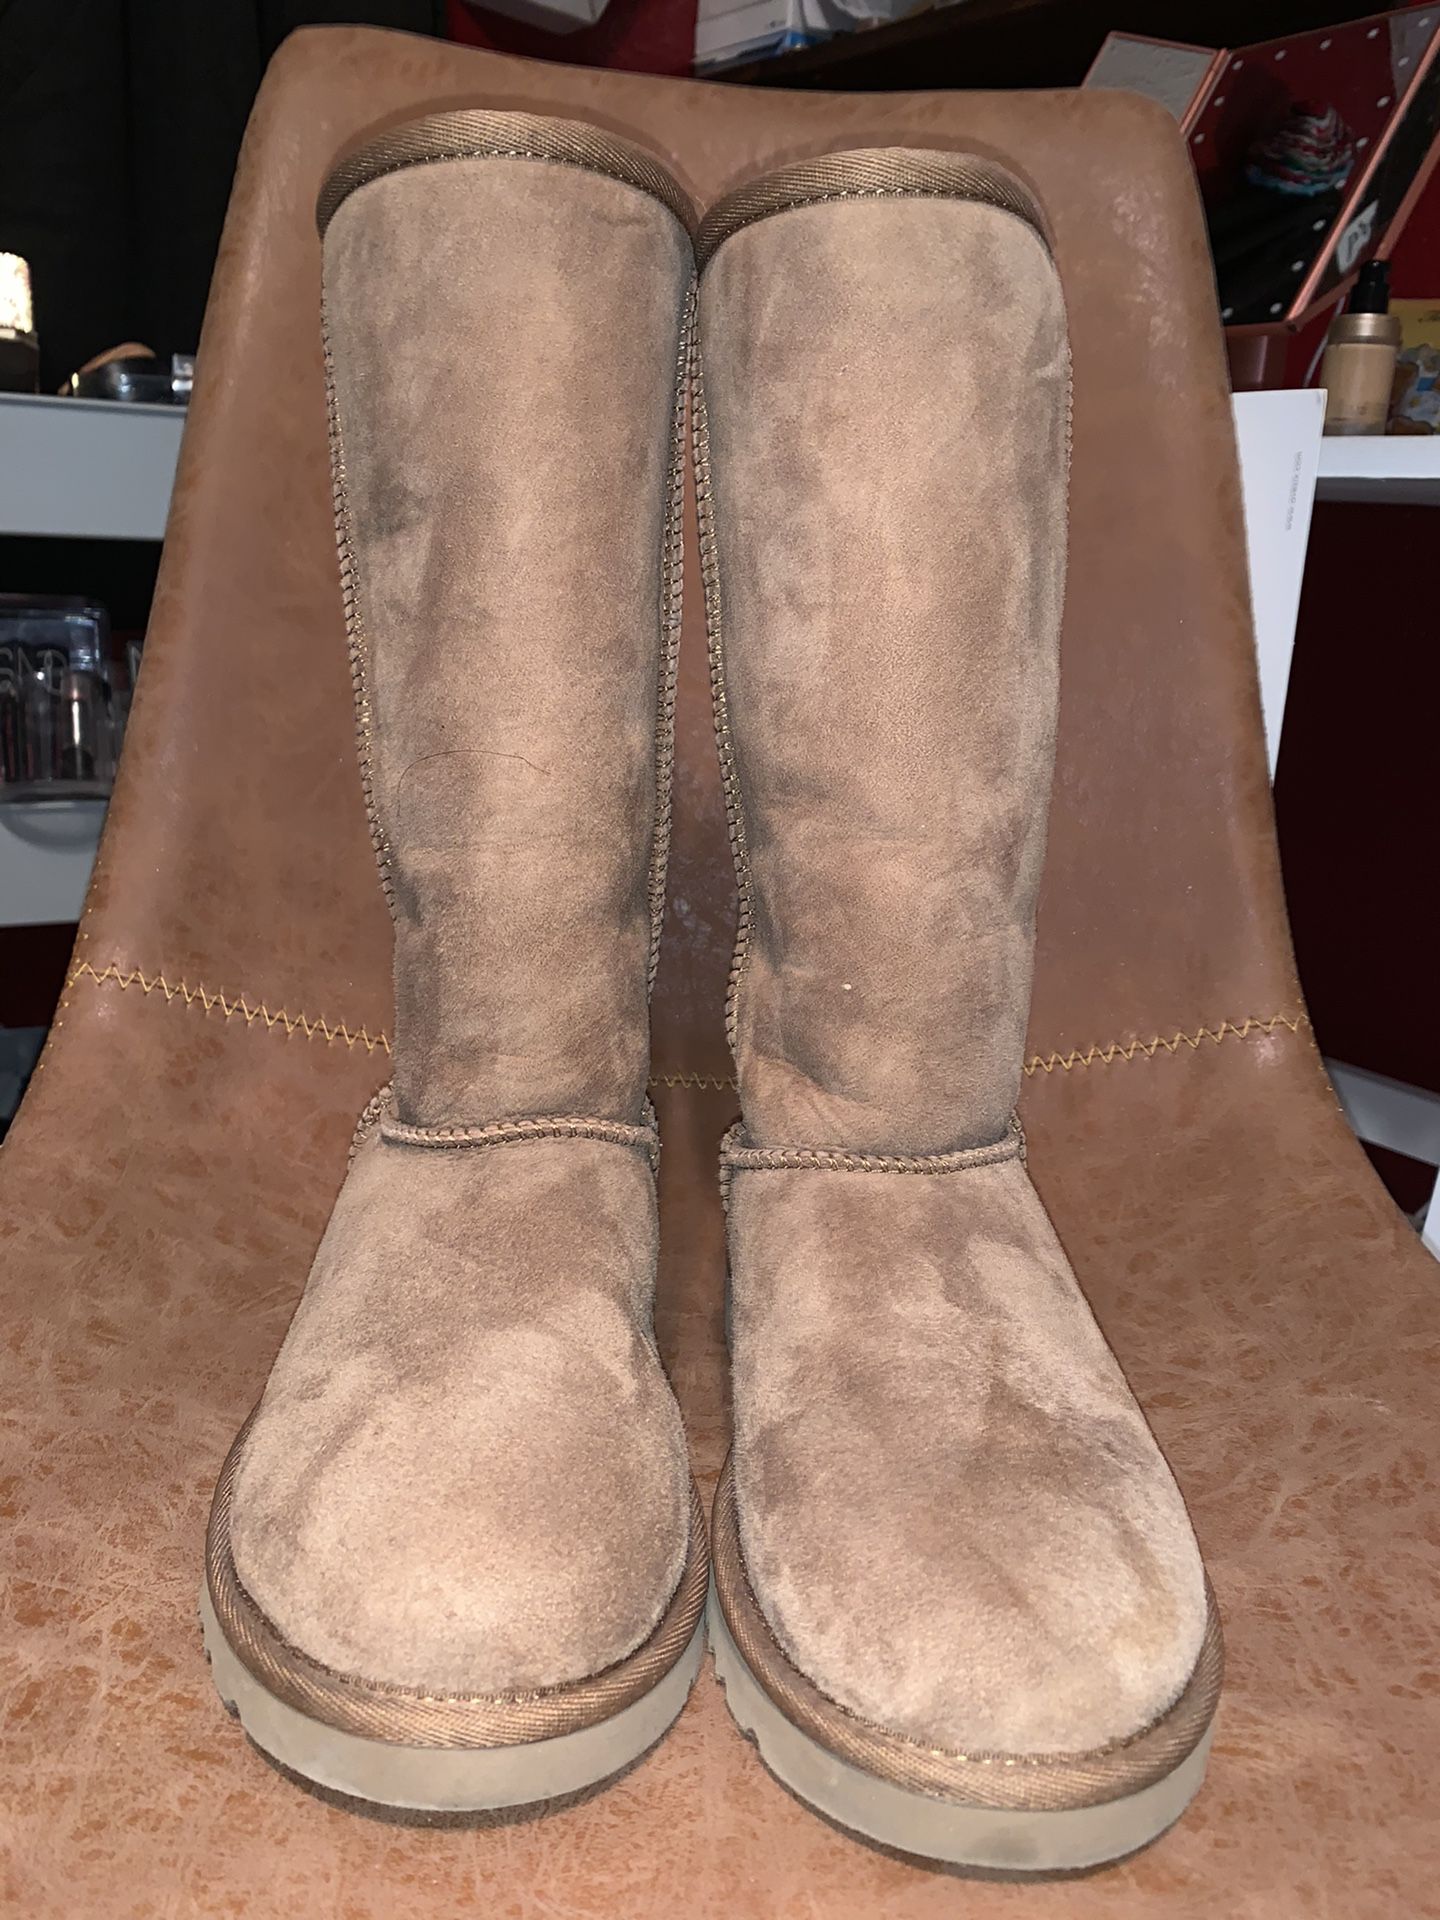 Authentic UGG tall boots size 6 brand new no box